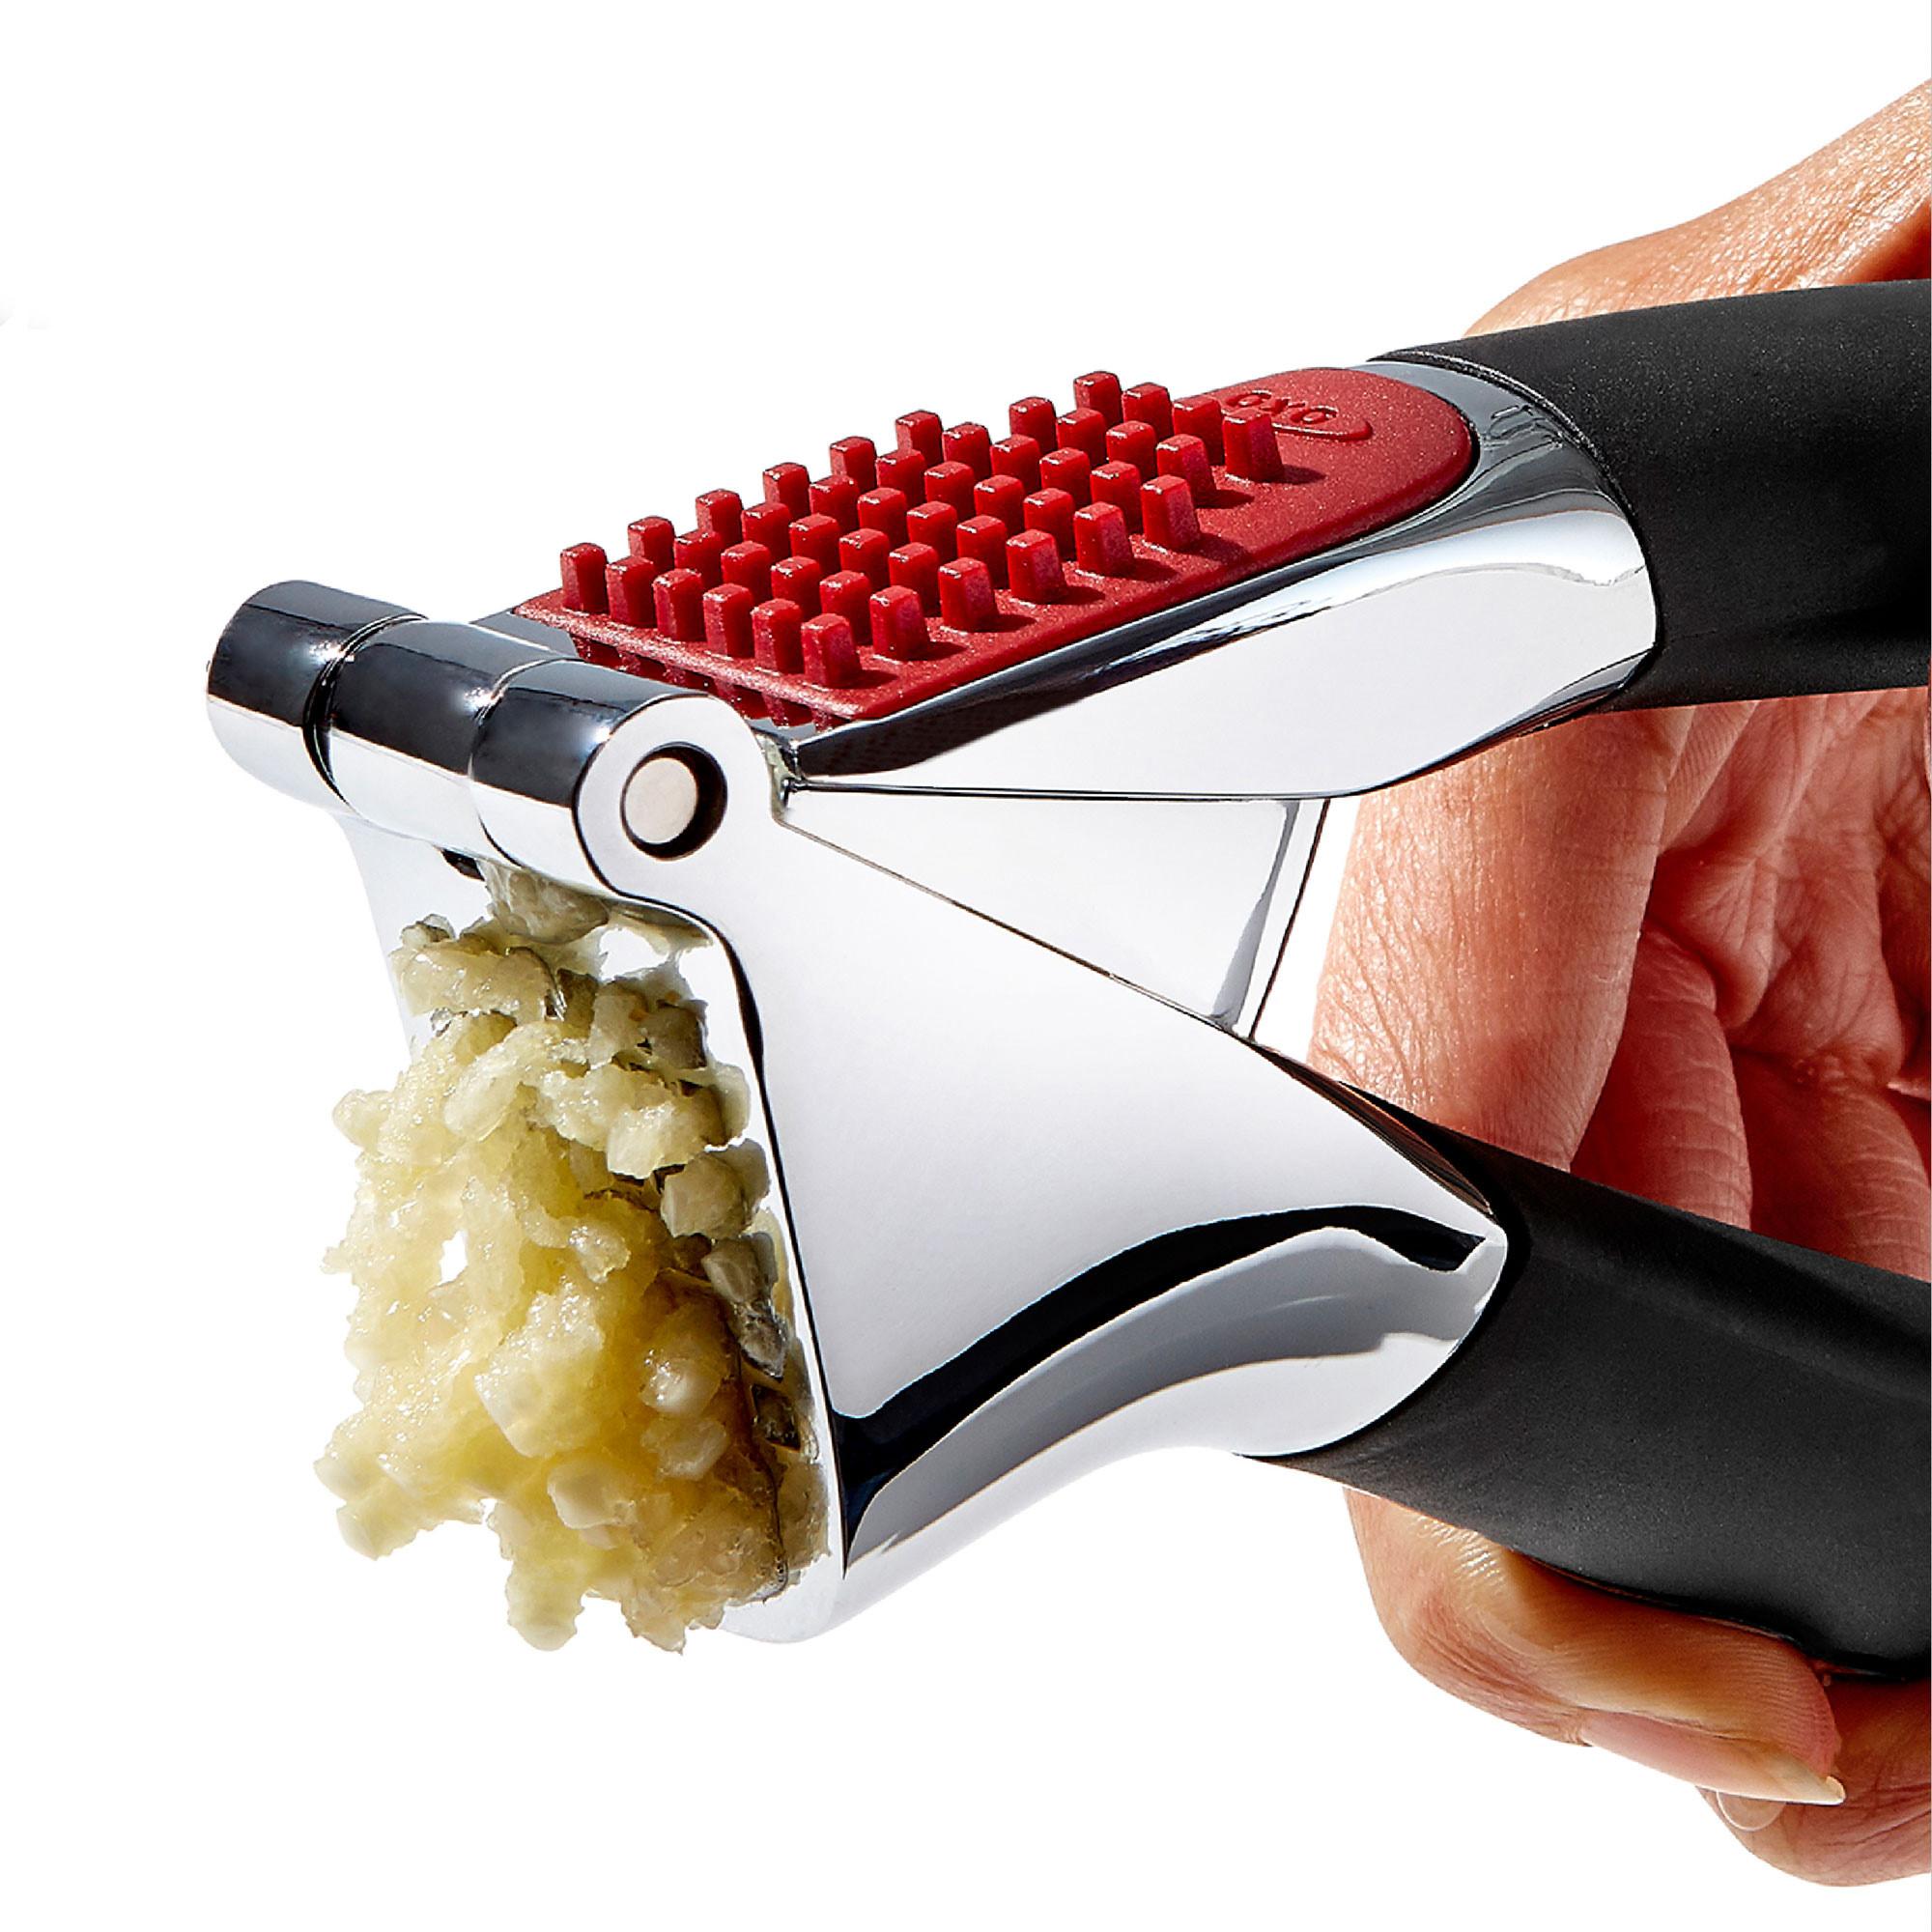 OXO Good Grips Garlic Press with Built In Cleaner Image 4